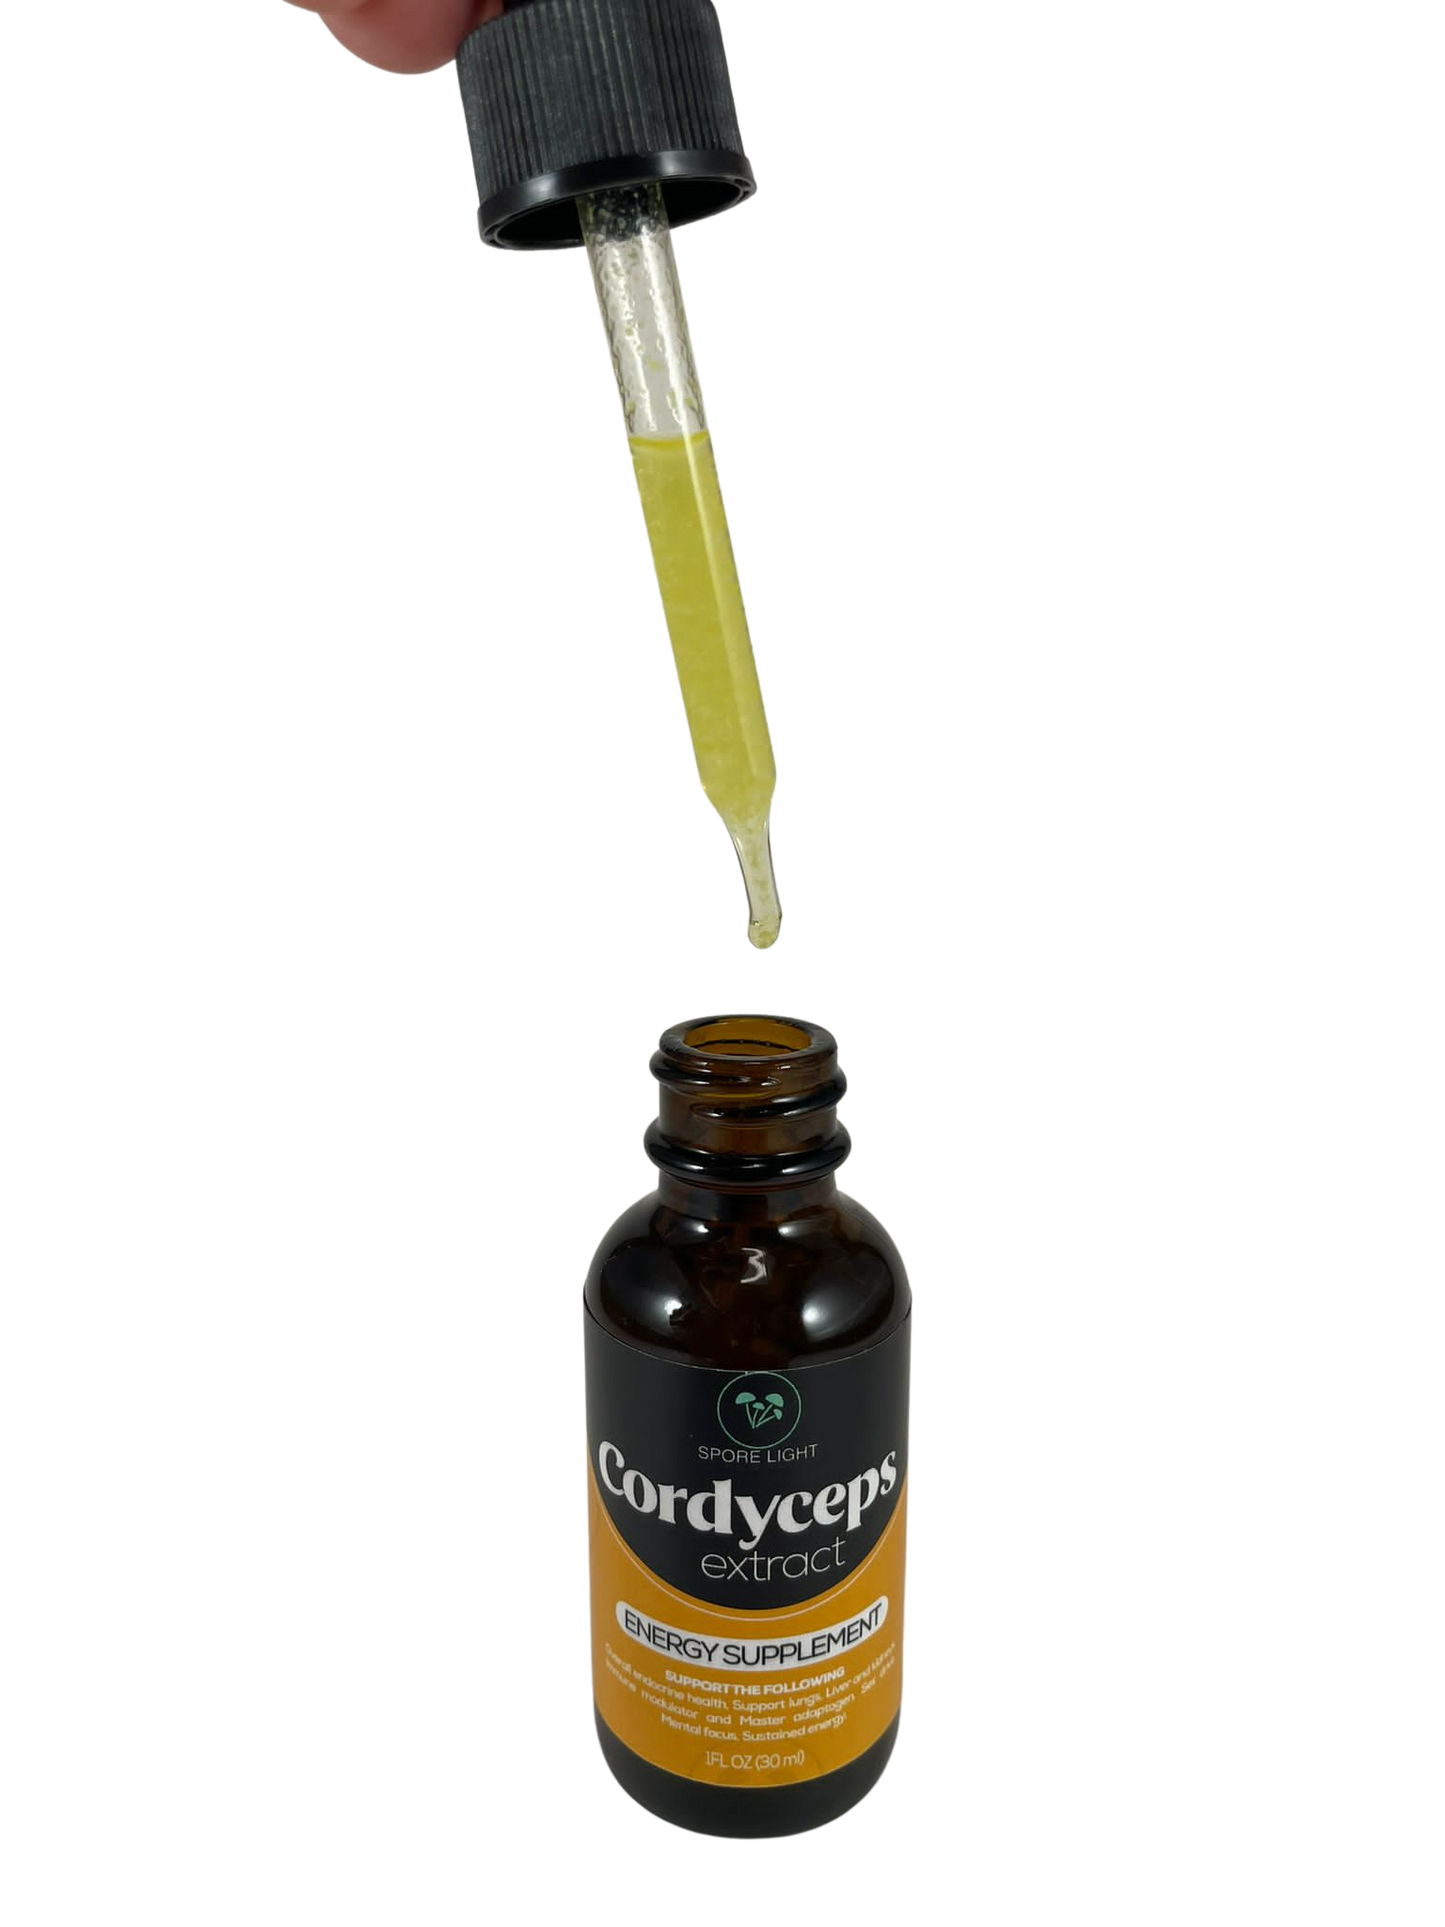 Spore Light Cordyceps extract, Energy Supplement. Picture of the liquid dropper showing the thickness of the Polizacharydes. 1FL OZ.